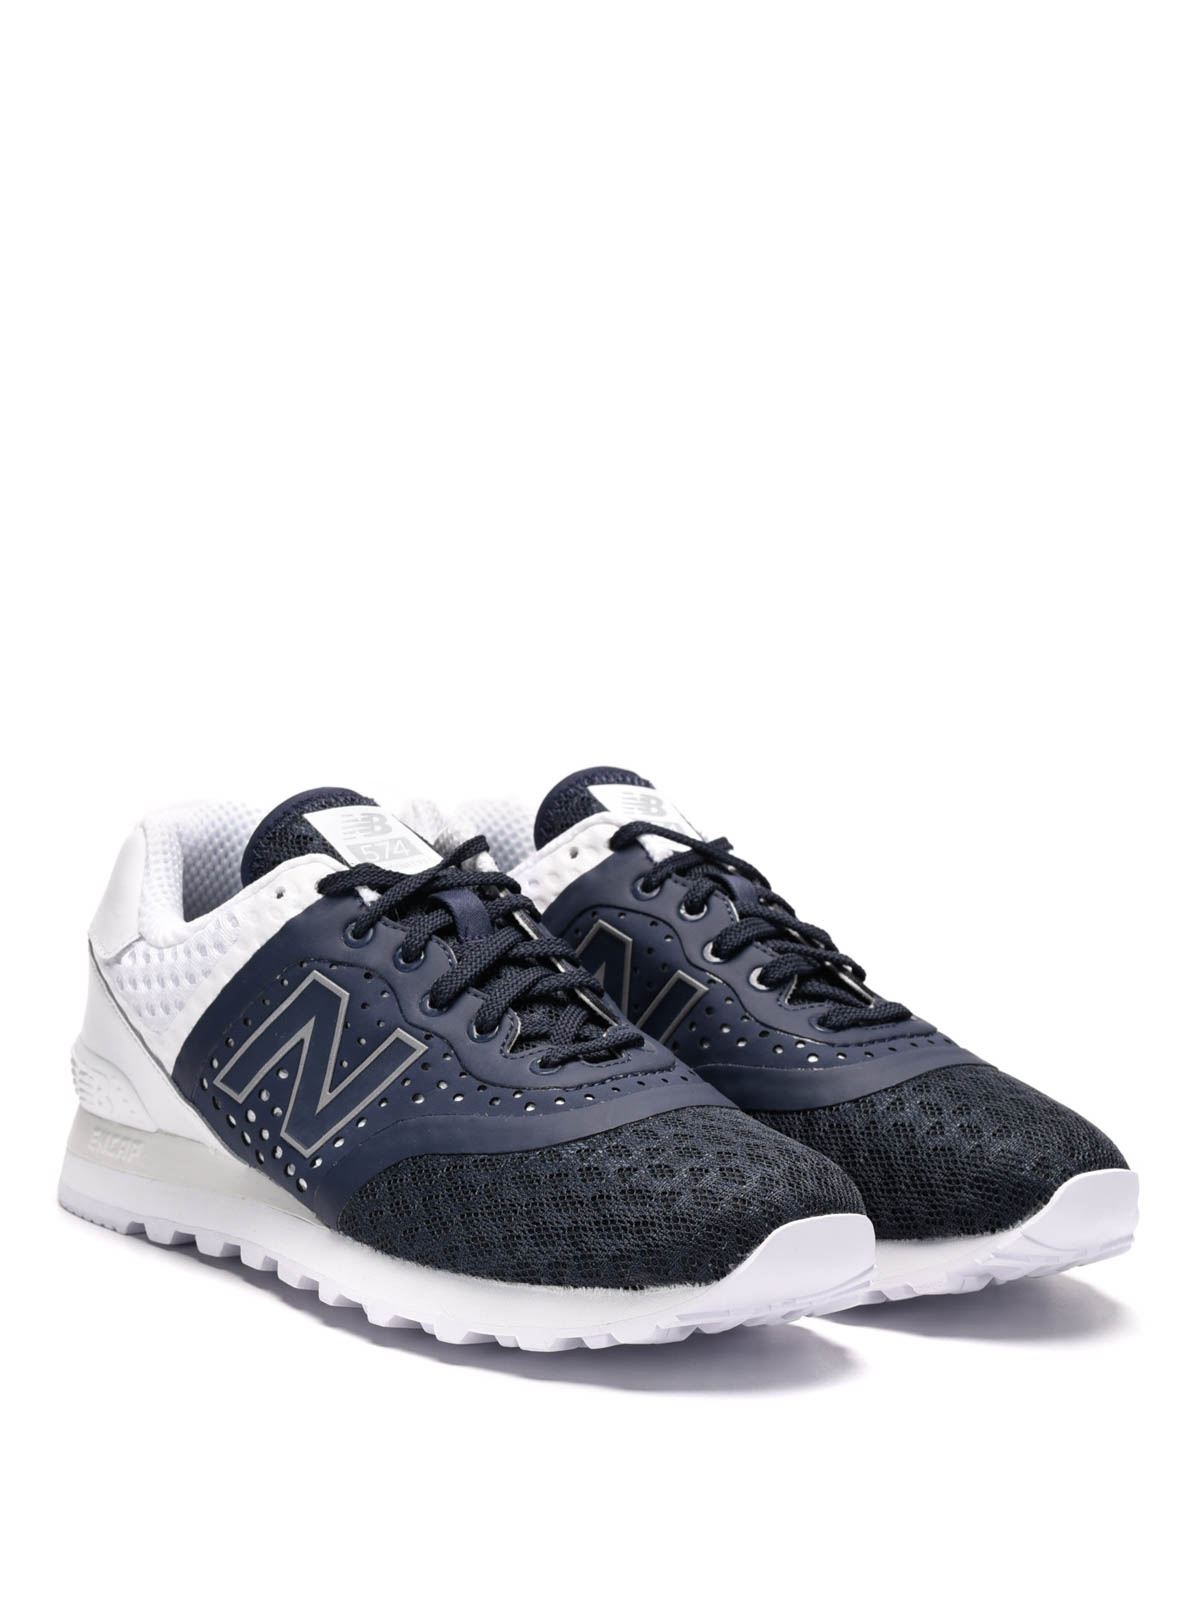 Trainers New Balance - Lifestyle sneakers - MTL574MN